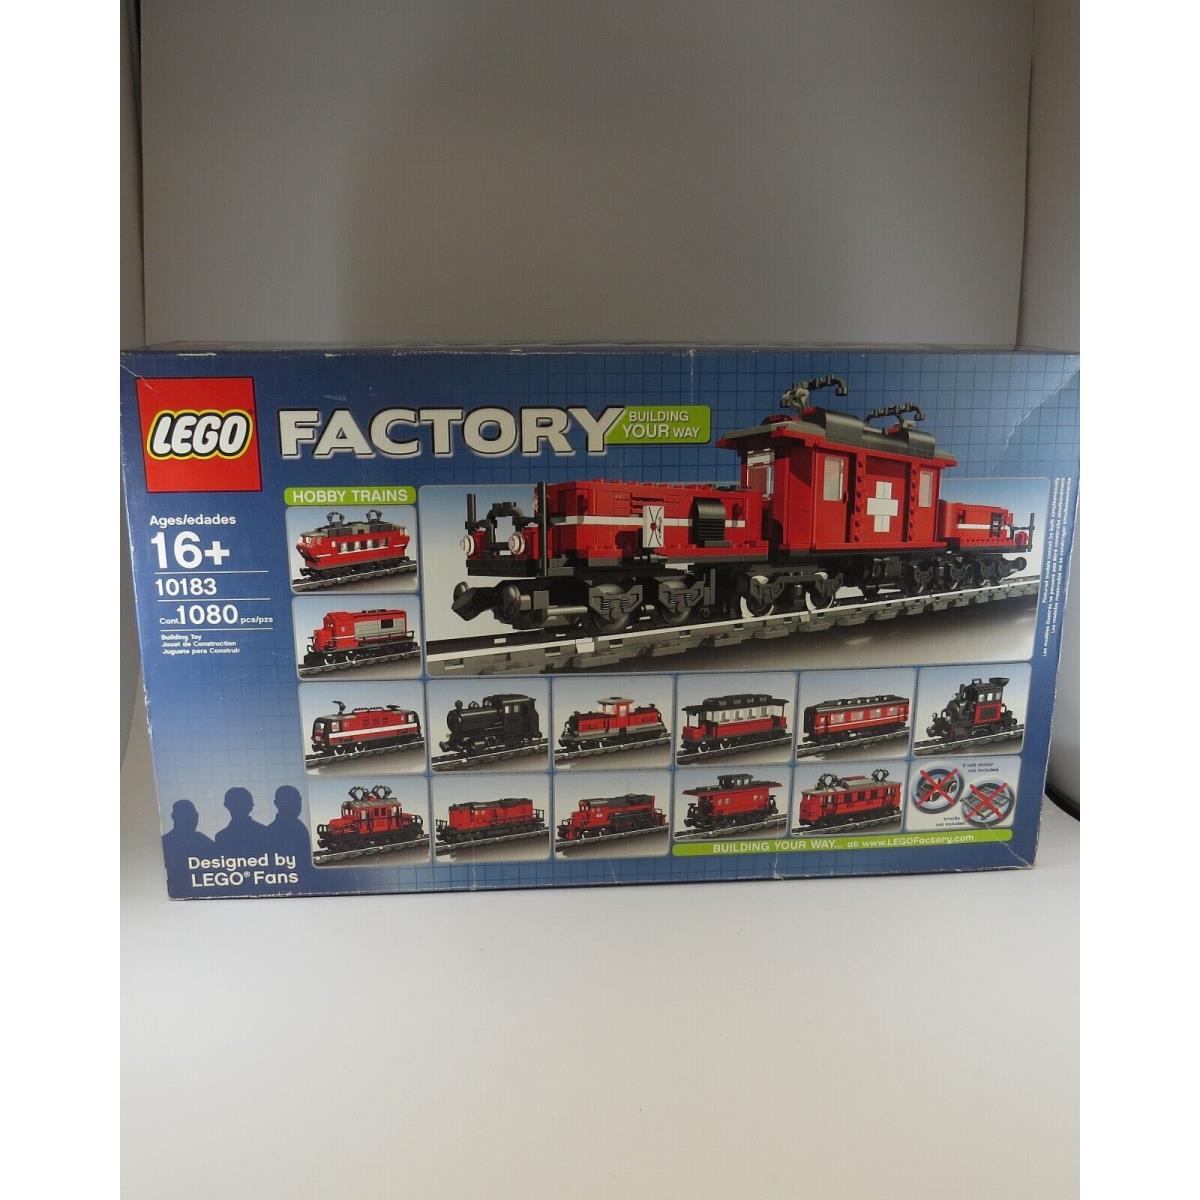 Lego Factory: Hobby Trains Set 10183 in Box